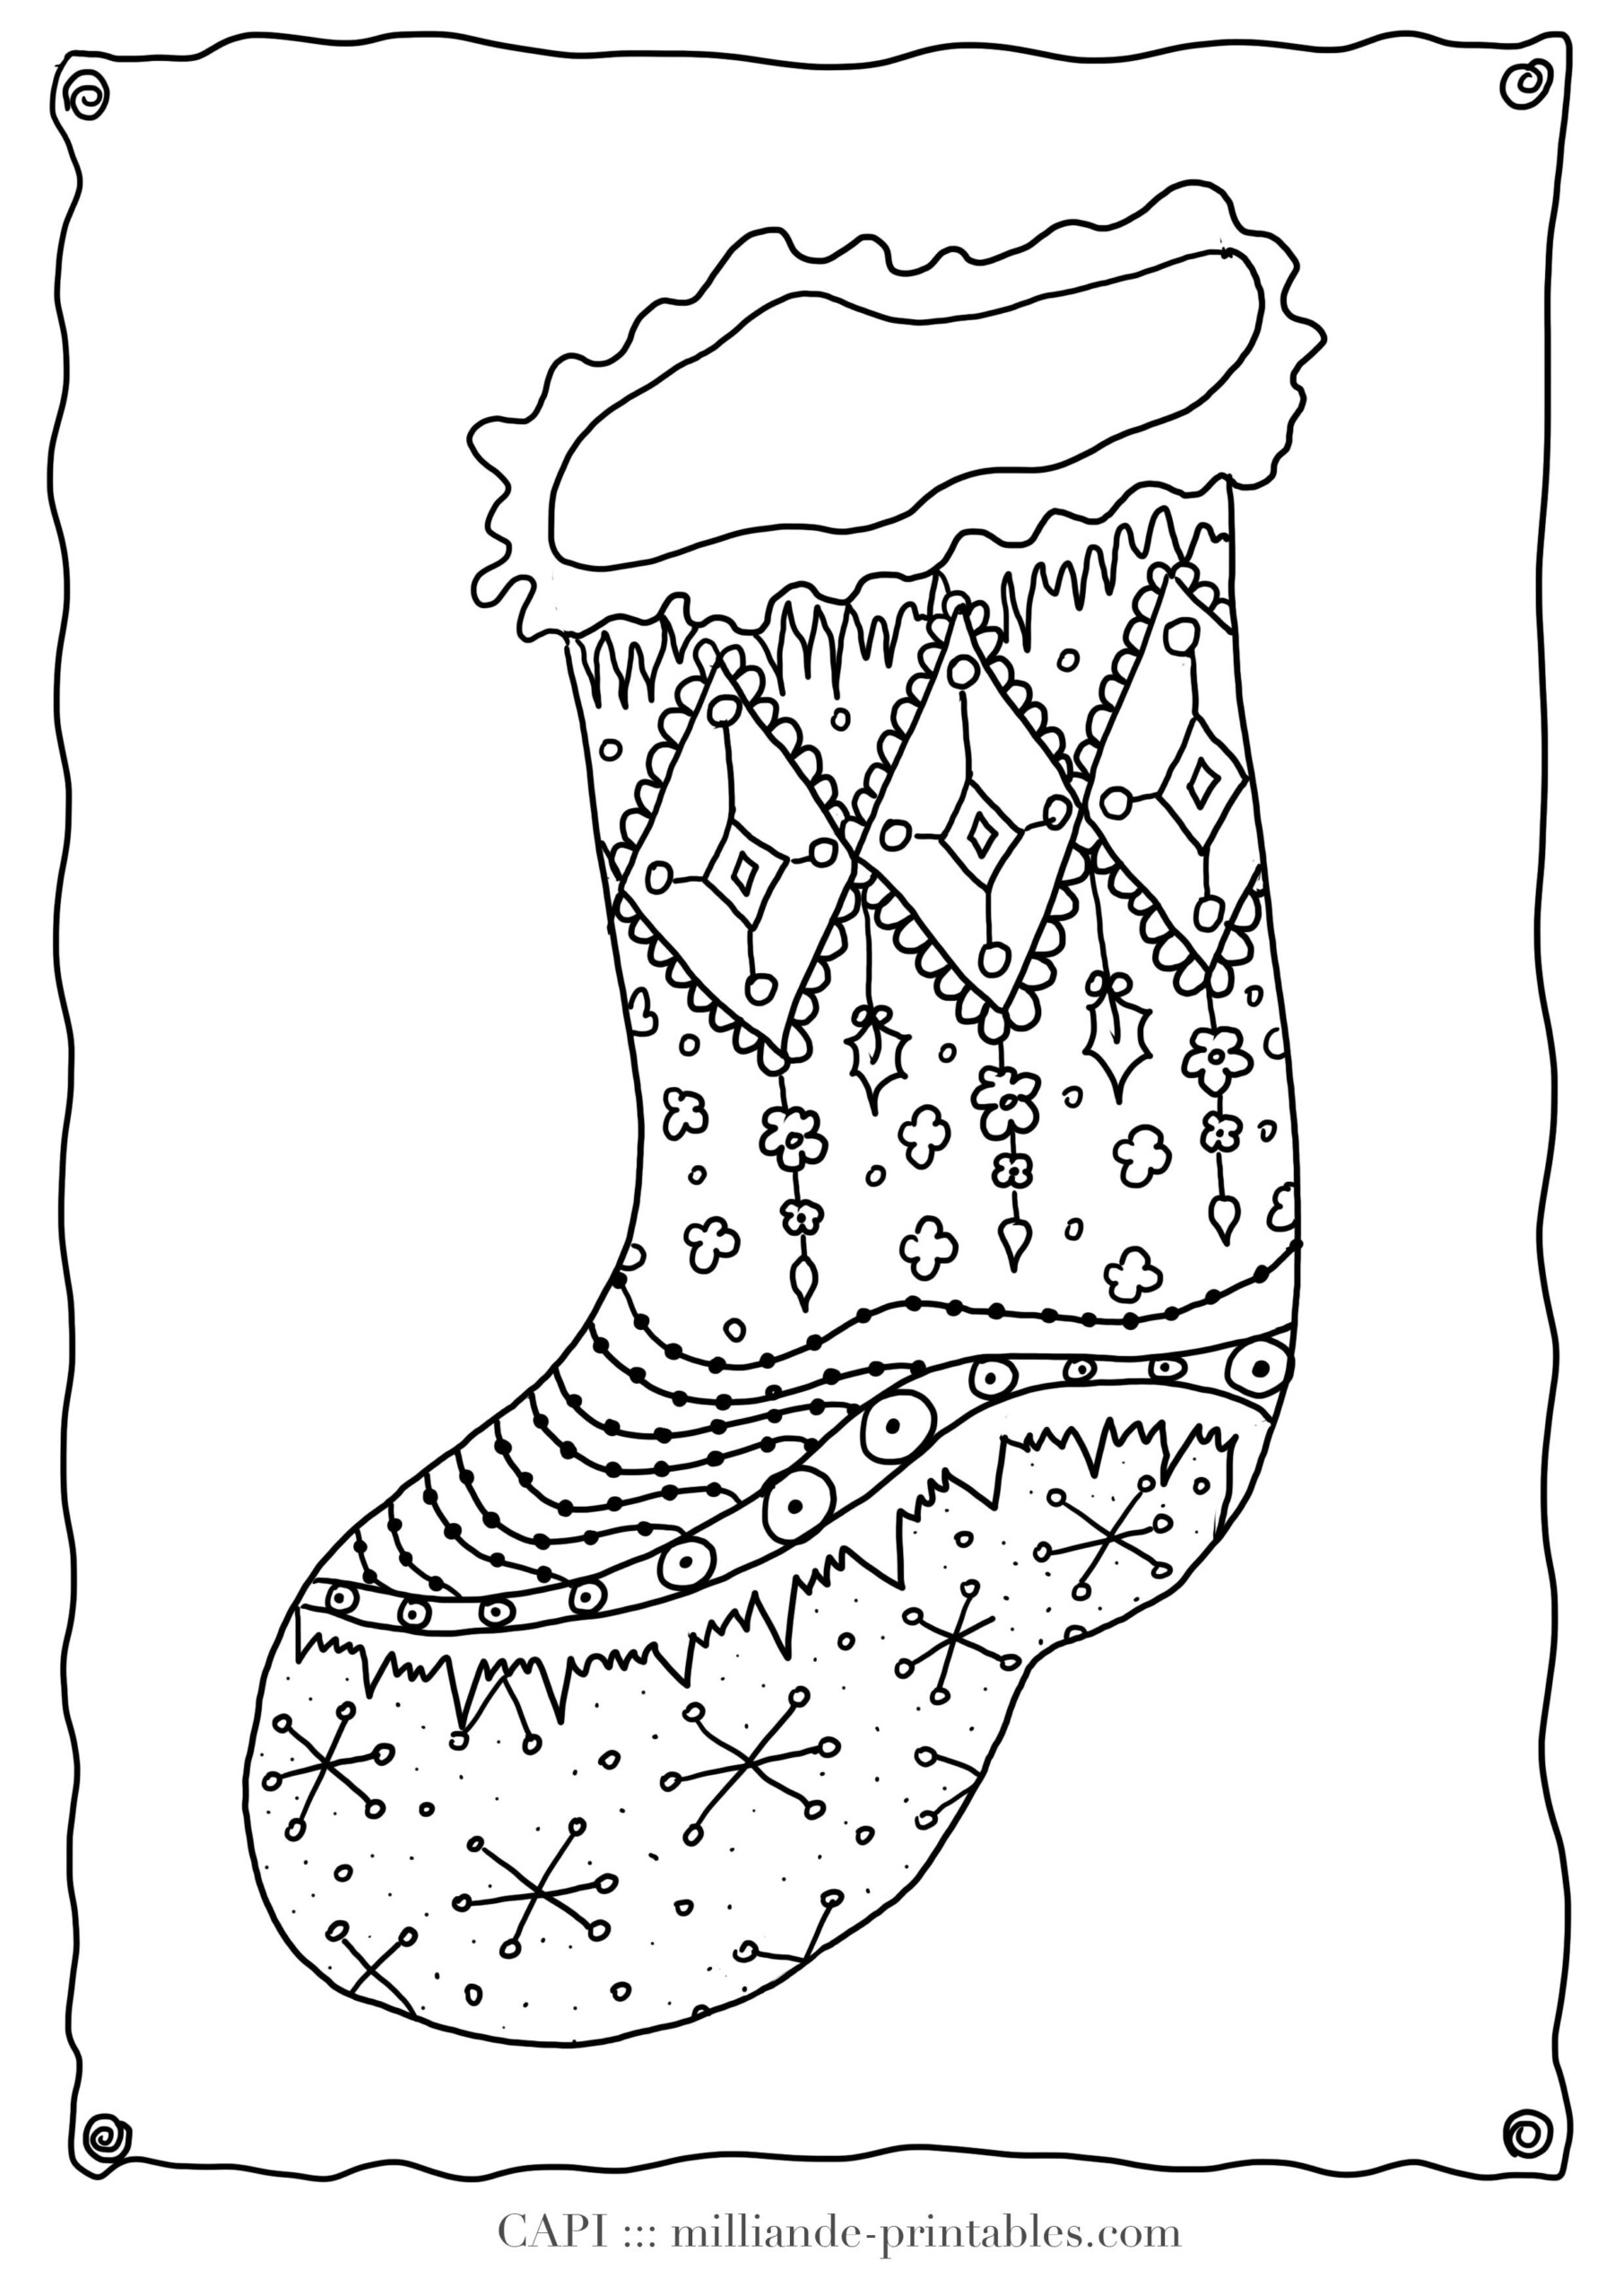 Christmas Coloring Page Stocking, Milliande&amp;#039;s Free Christmas